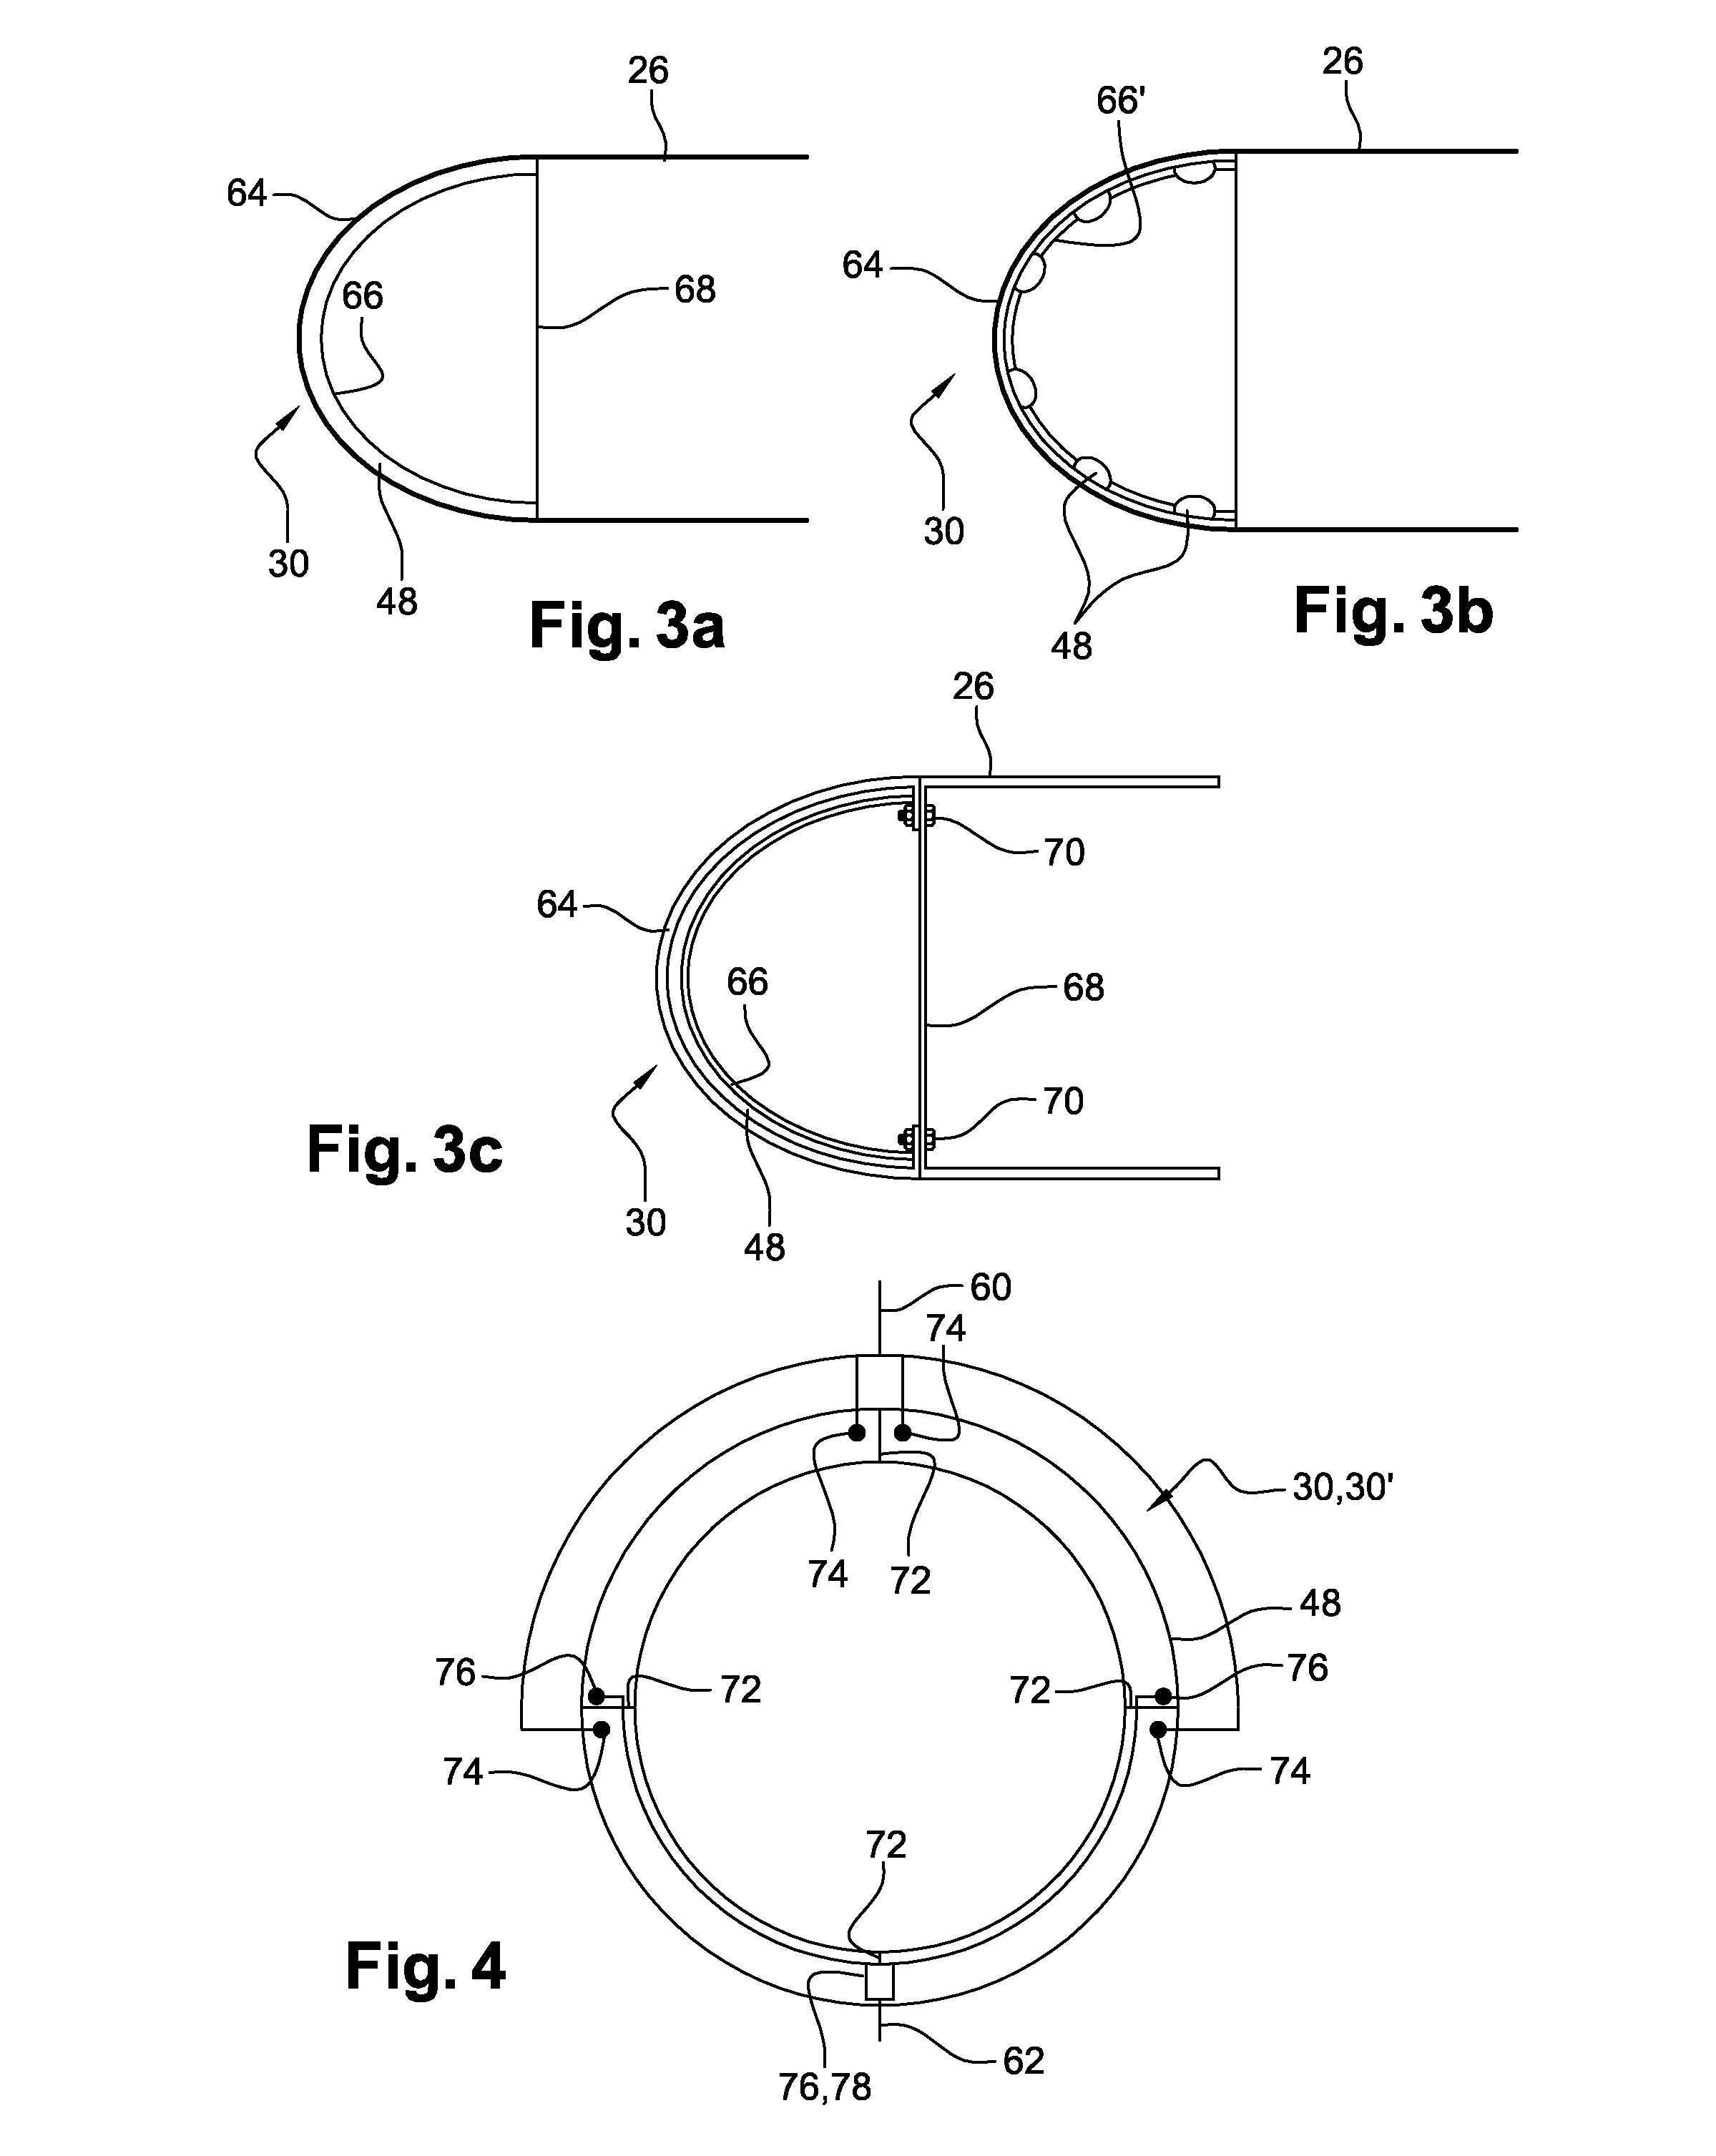 Circuit for de-icing an air inlet lip of an aircraft propulsion assembly